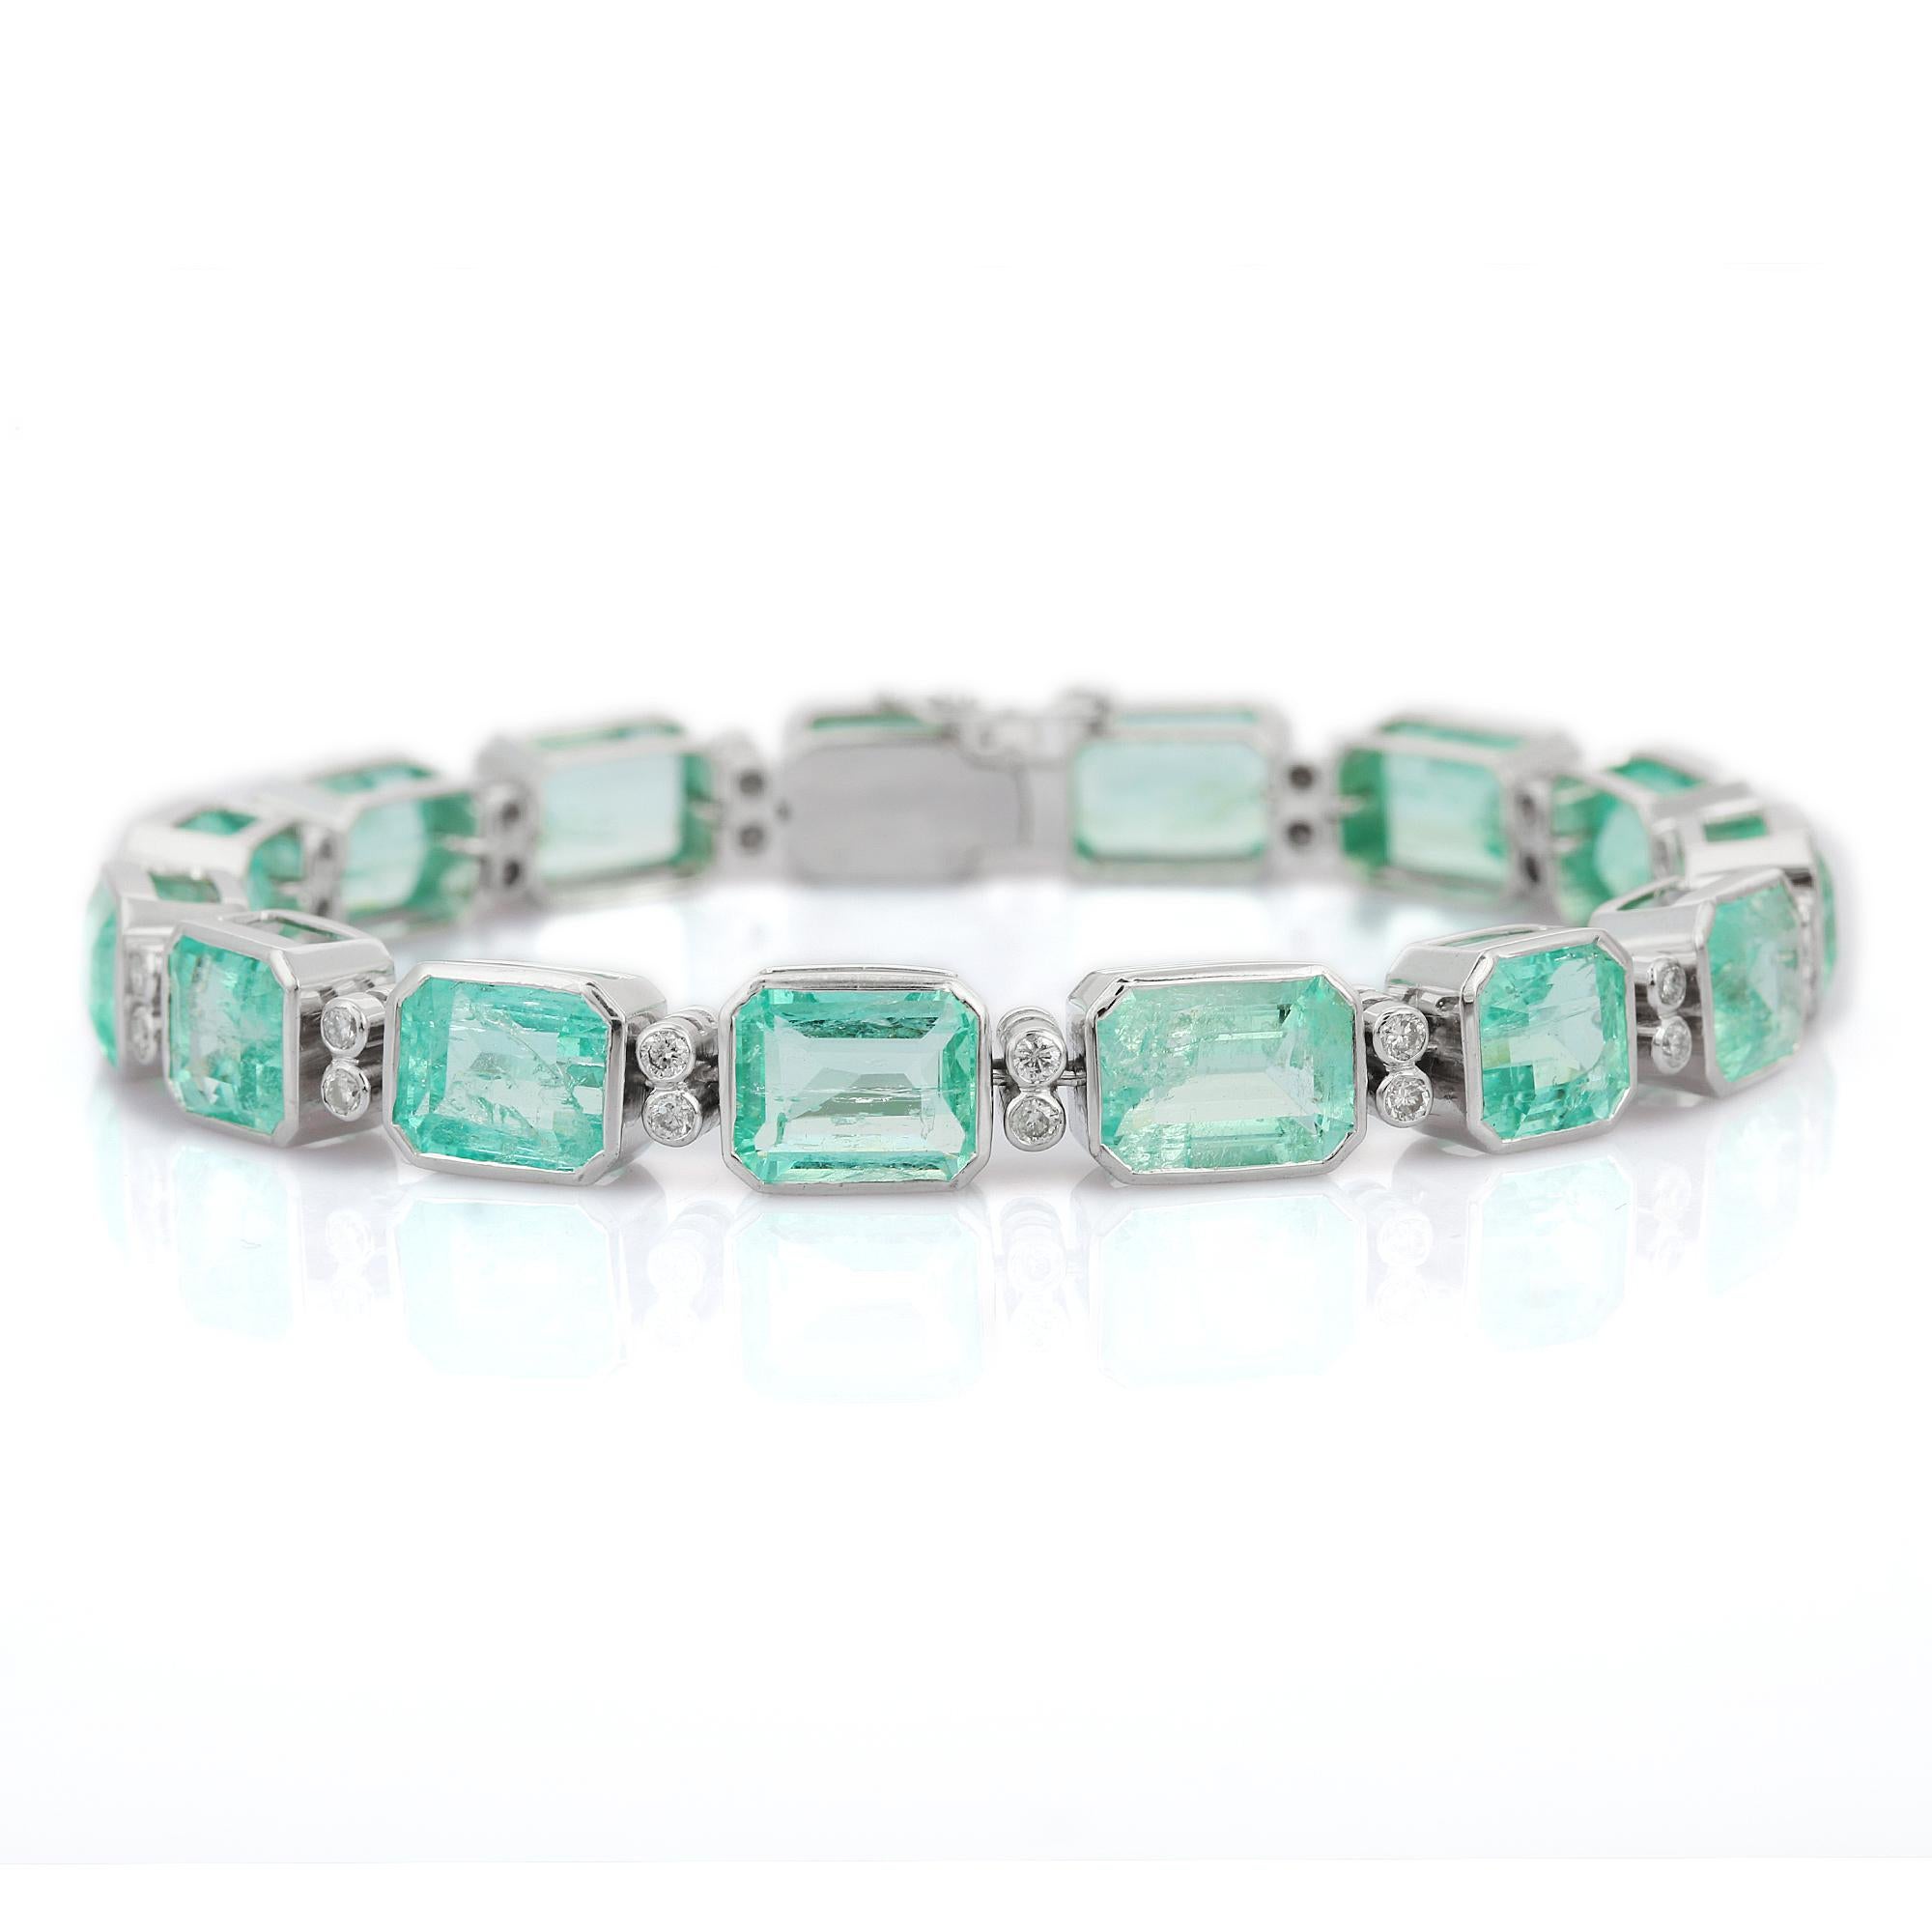 33.58 Carat Octagon Cut Emerald Tennis Bracelet with Diamonds in 18K White Gold For Sale